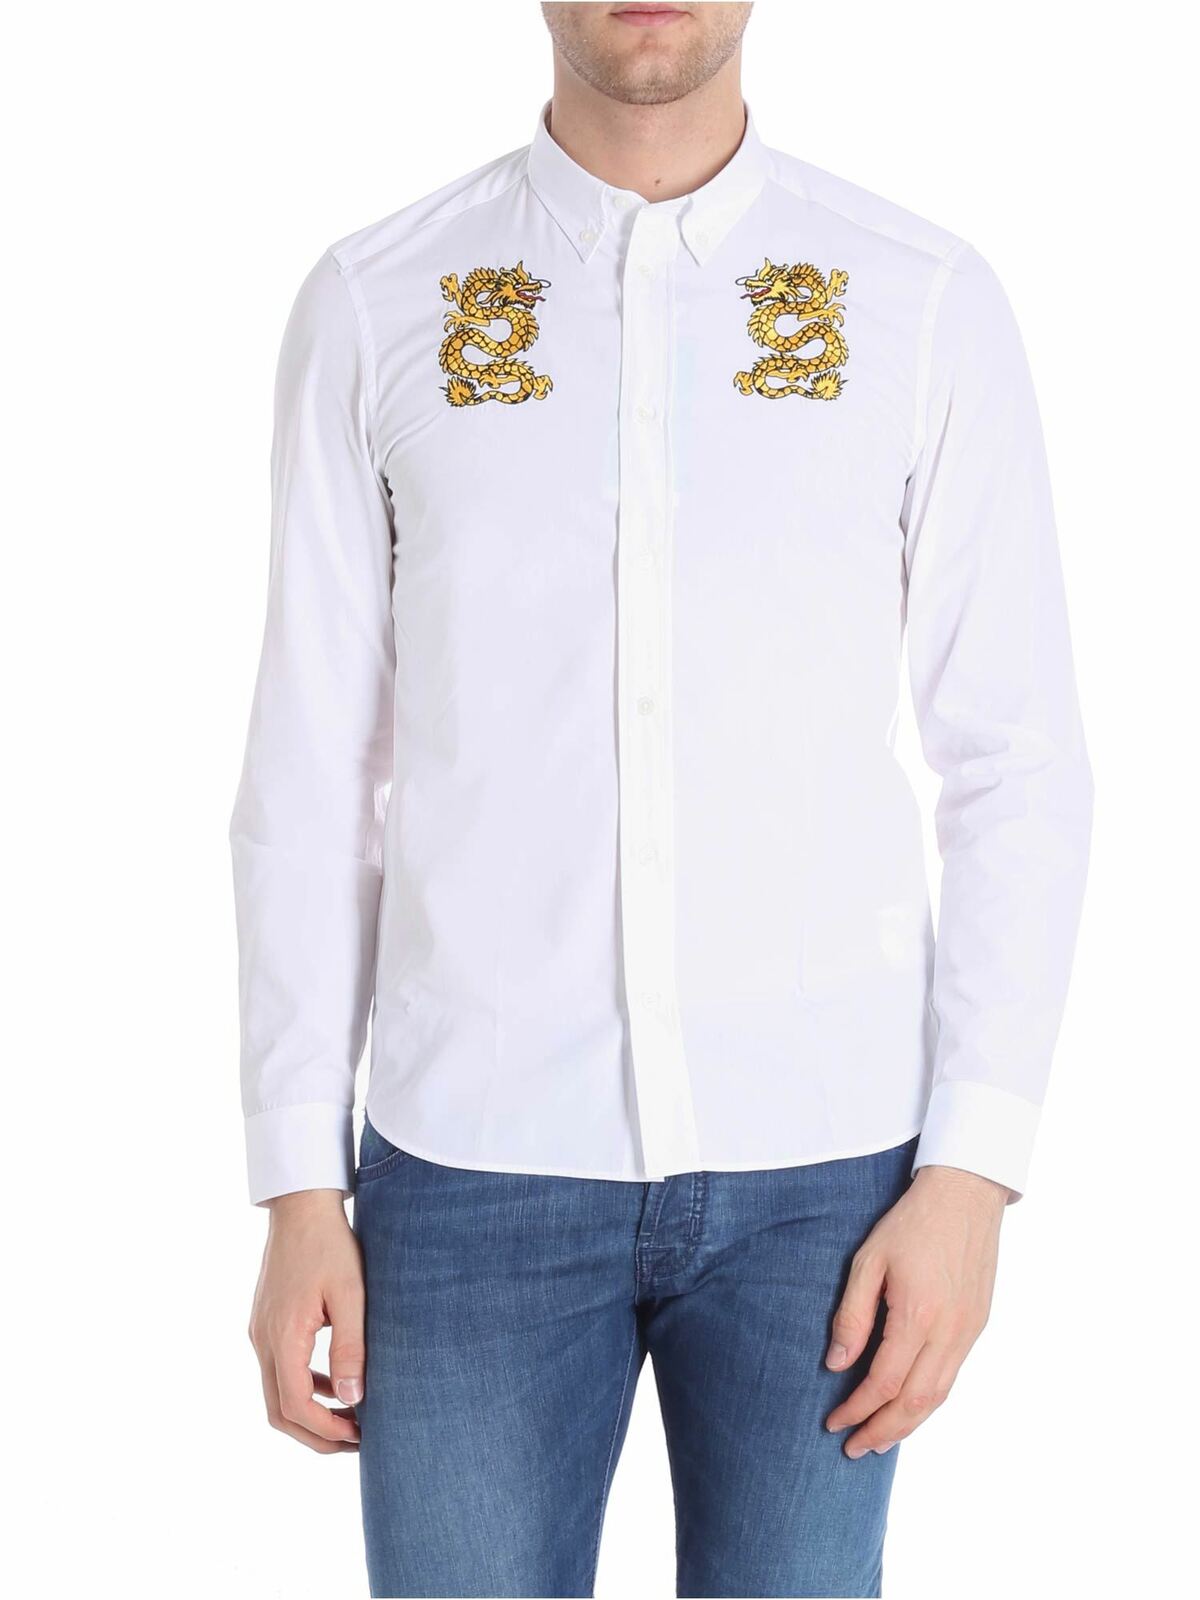 Kenzo White Shirt With Dragons Embroidery